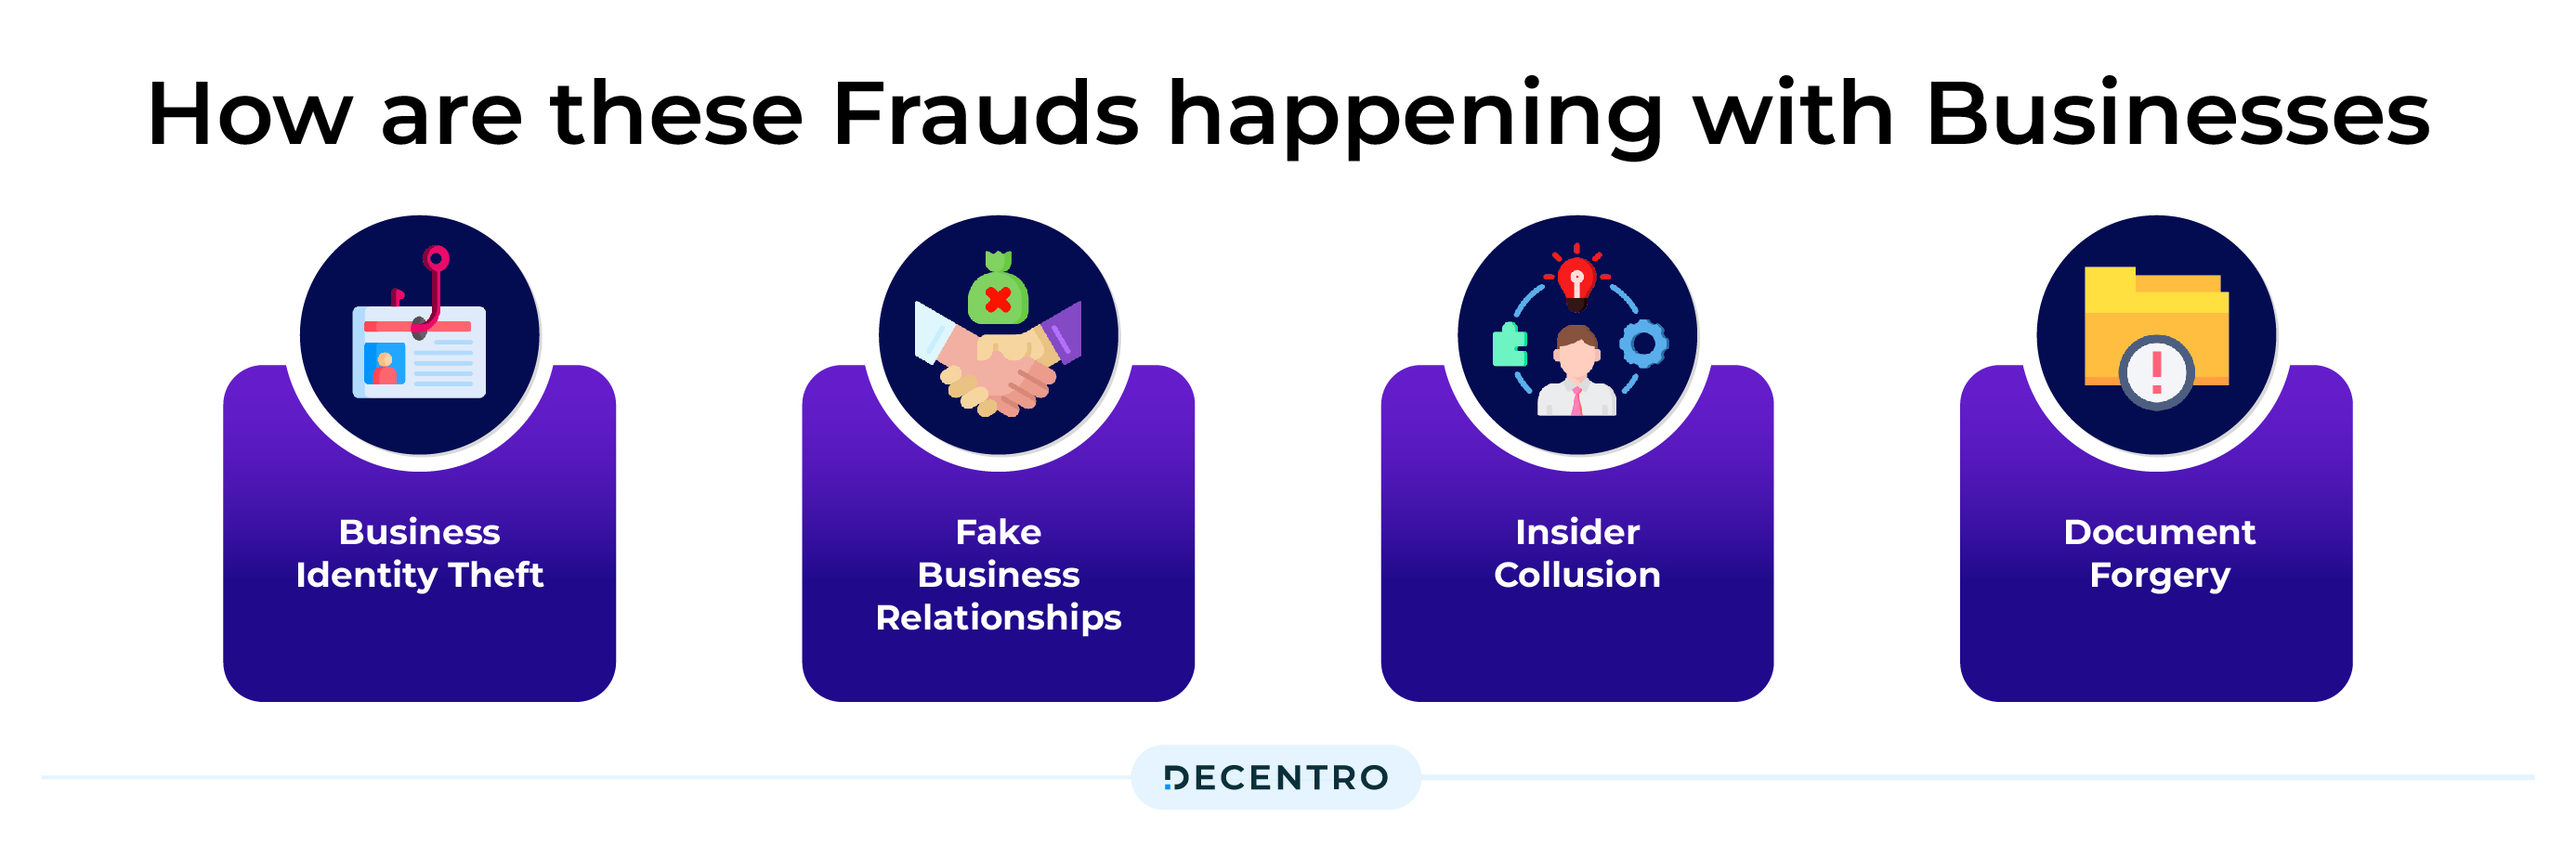 Frauds from Business perspective